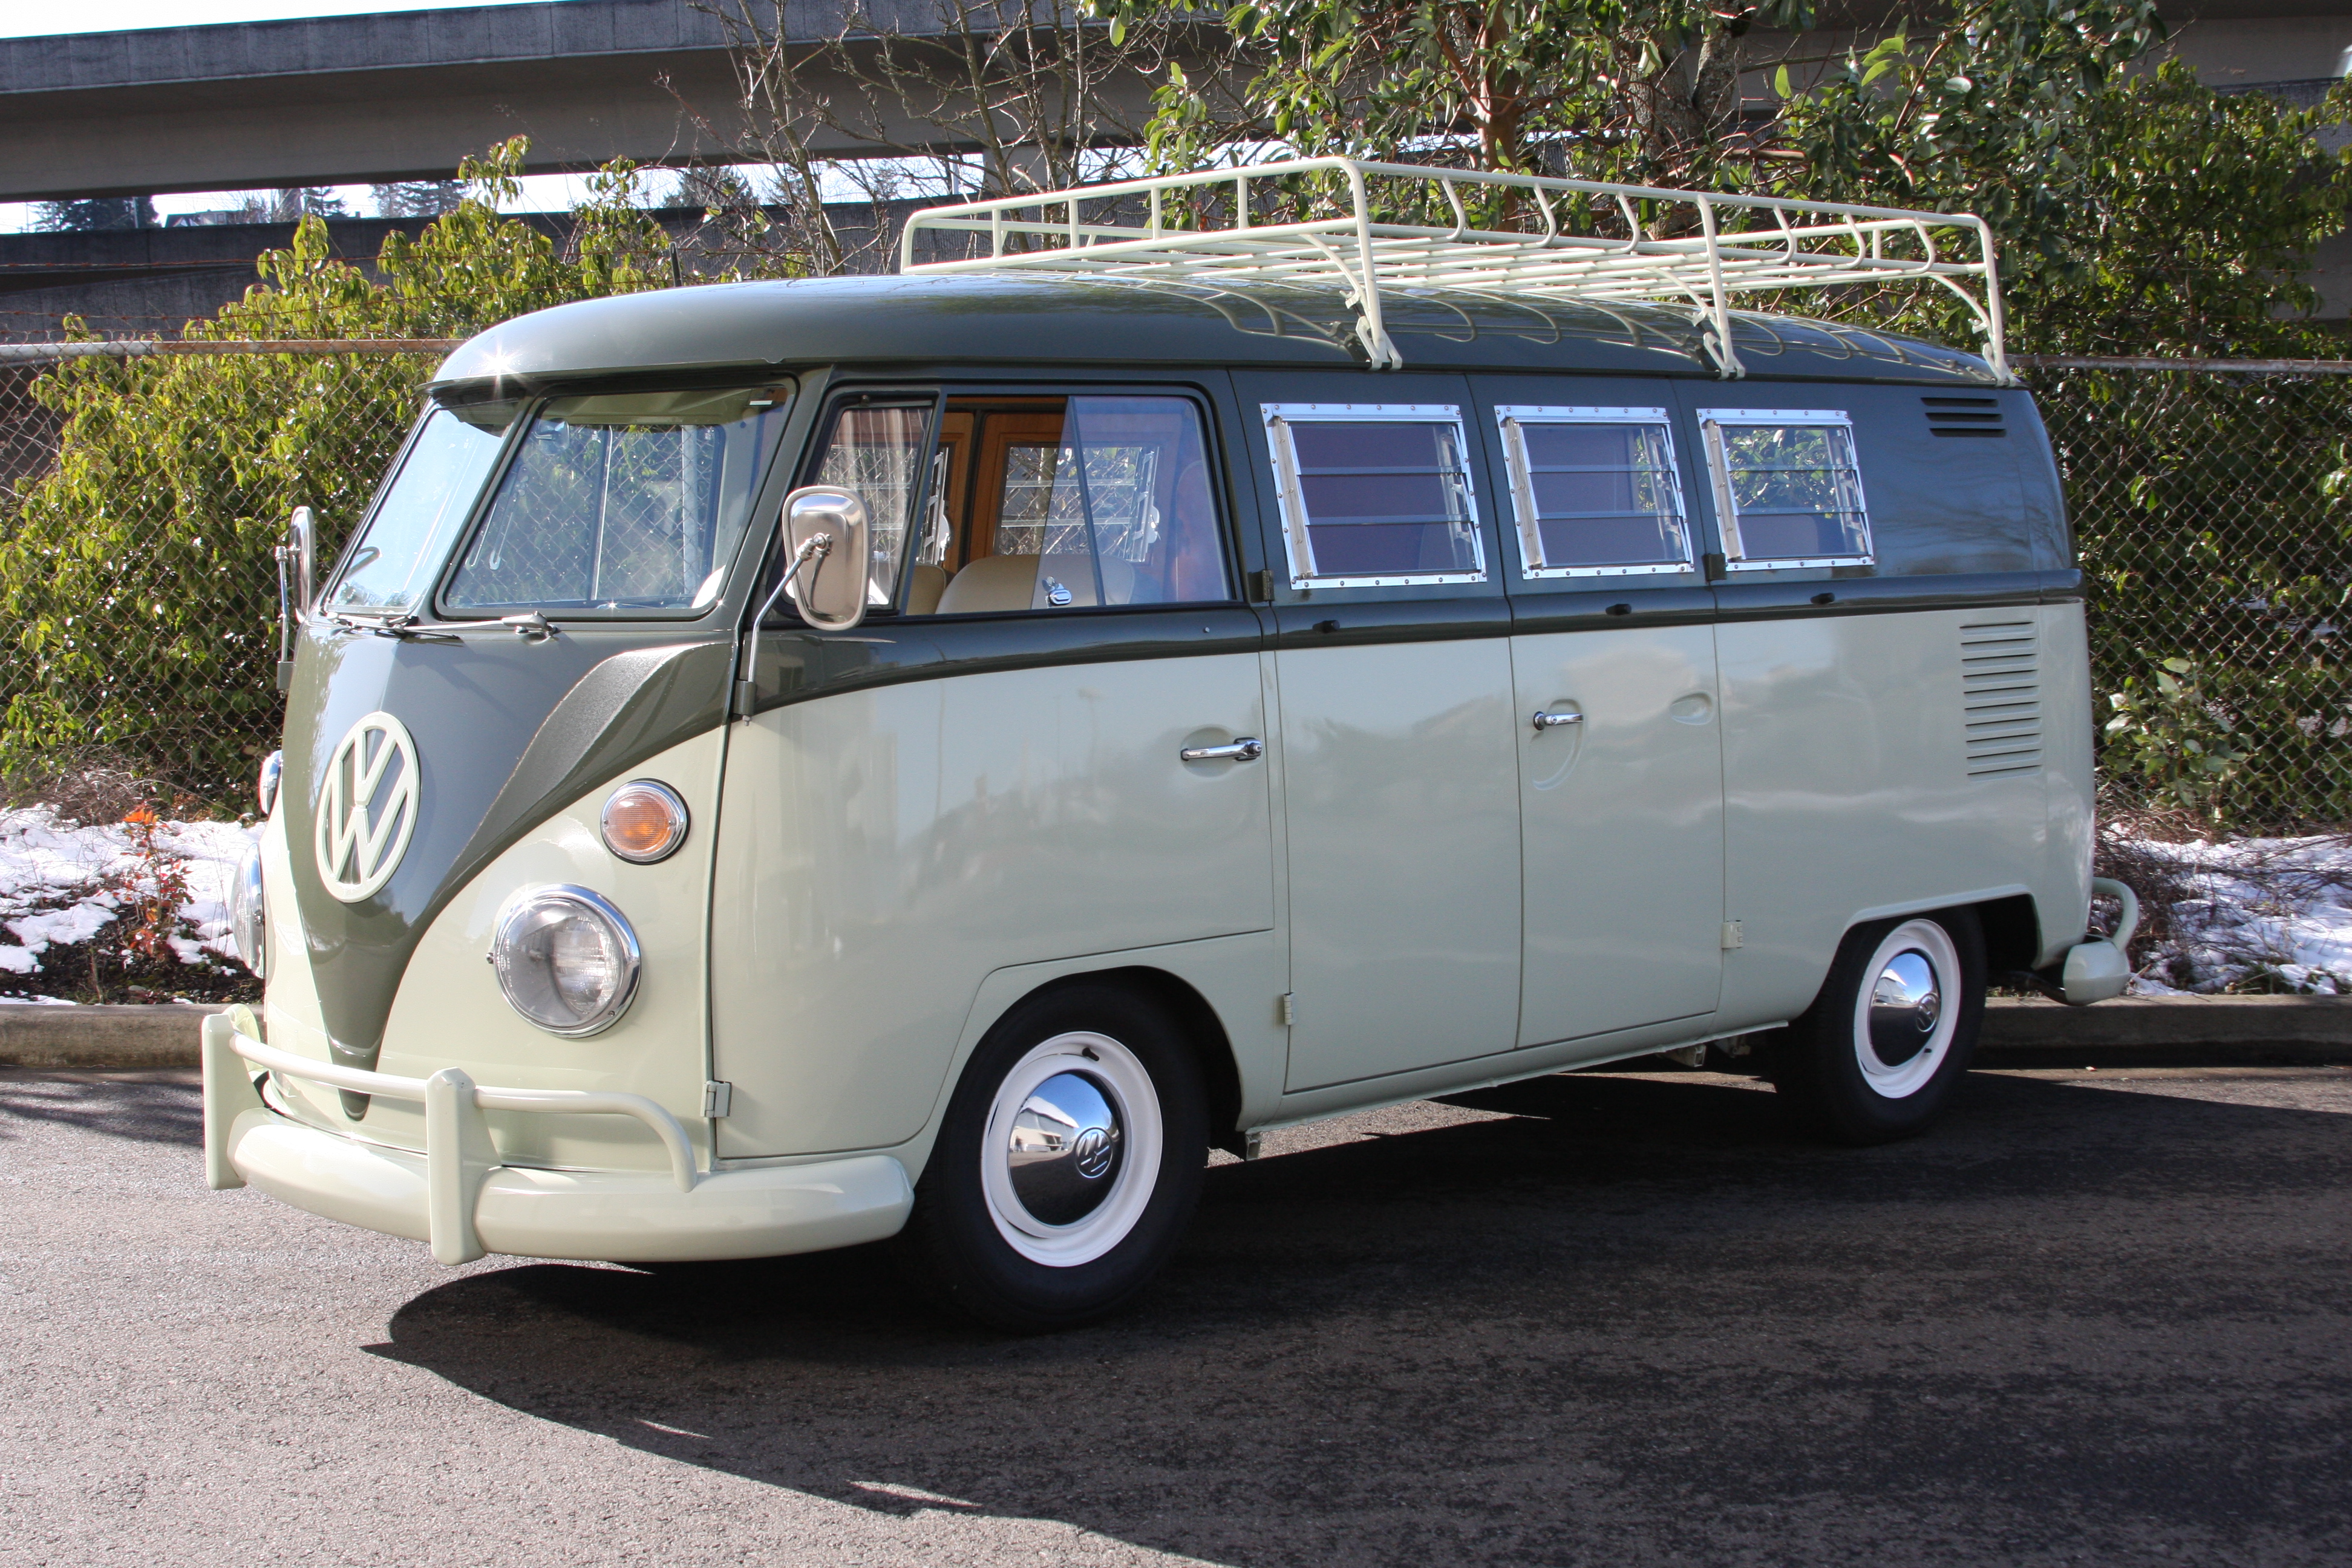 Correctly restored and fitted with a factory roof rack, the Microbus remains as evocative a symbol today as it was during the counterculture of the late 1960s. | William Hall photo